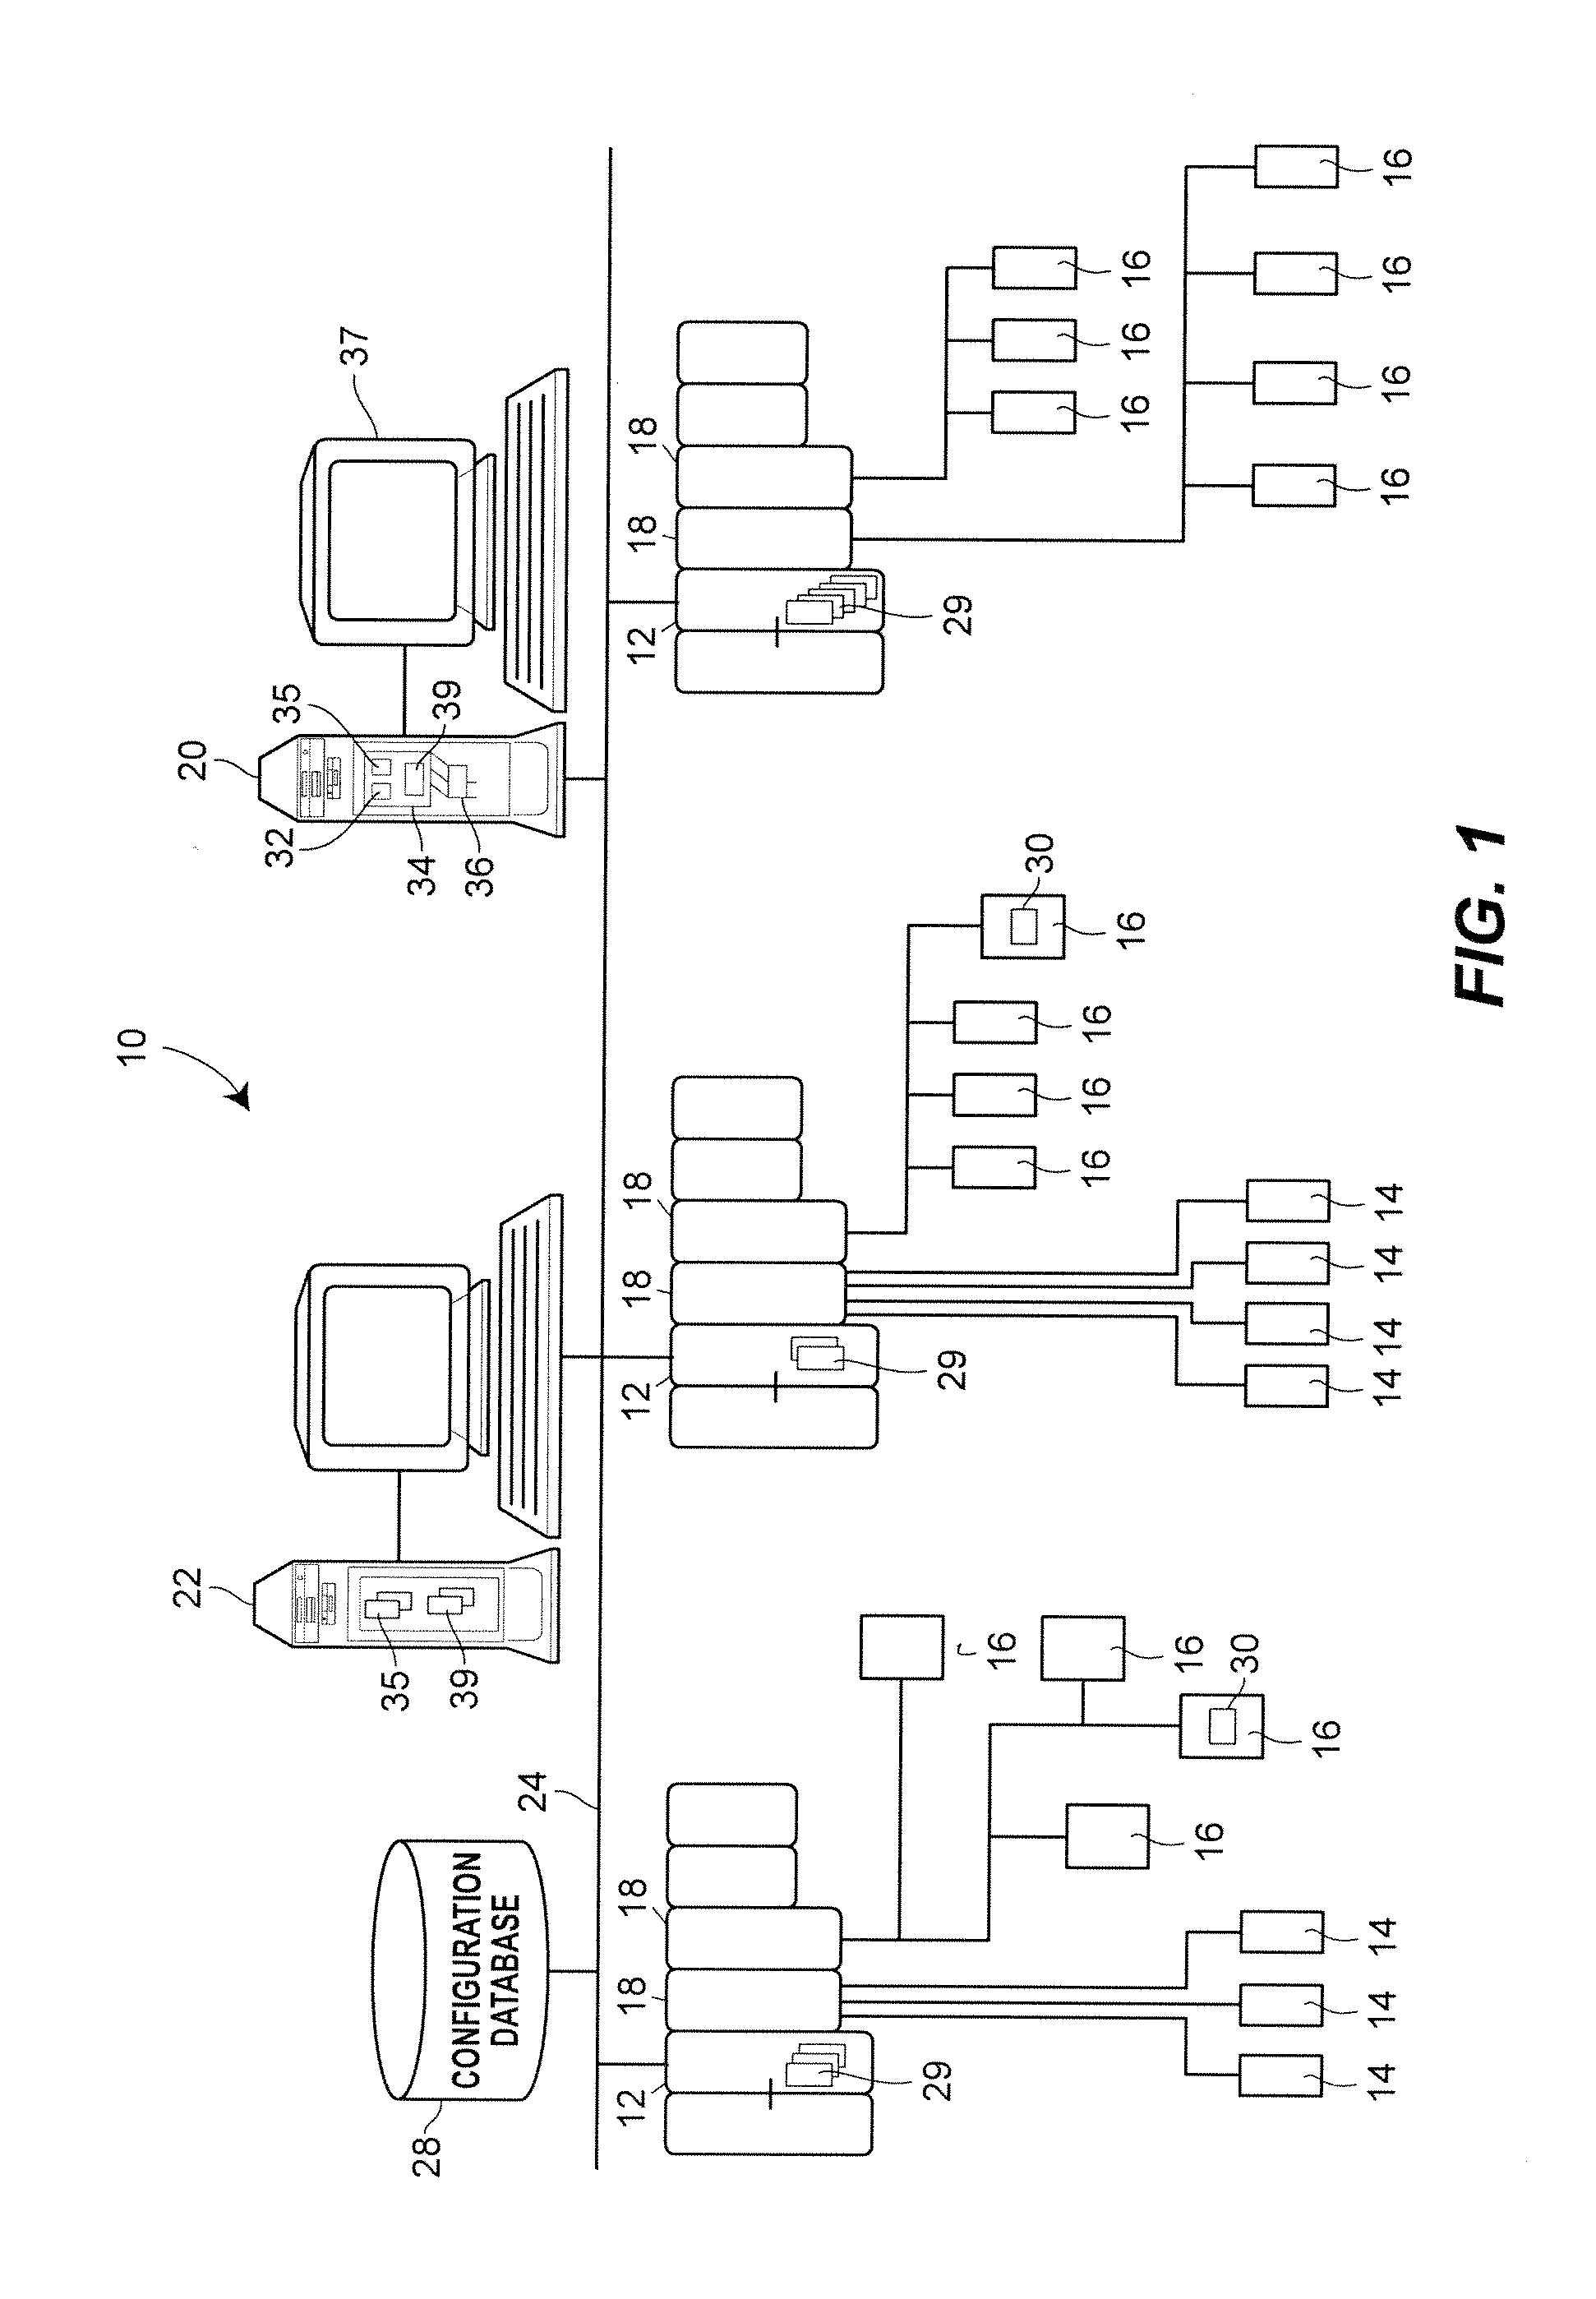 Dynamic User Interface for Configuring and Managing a Process Control System